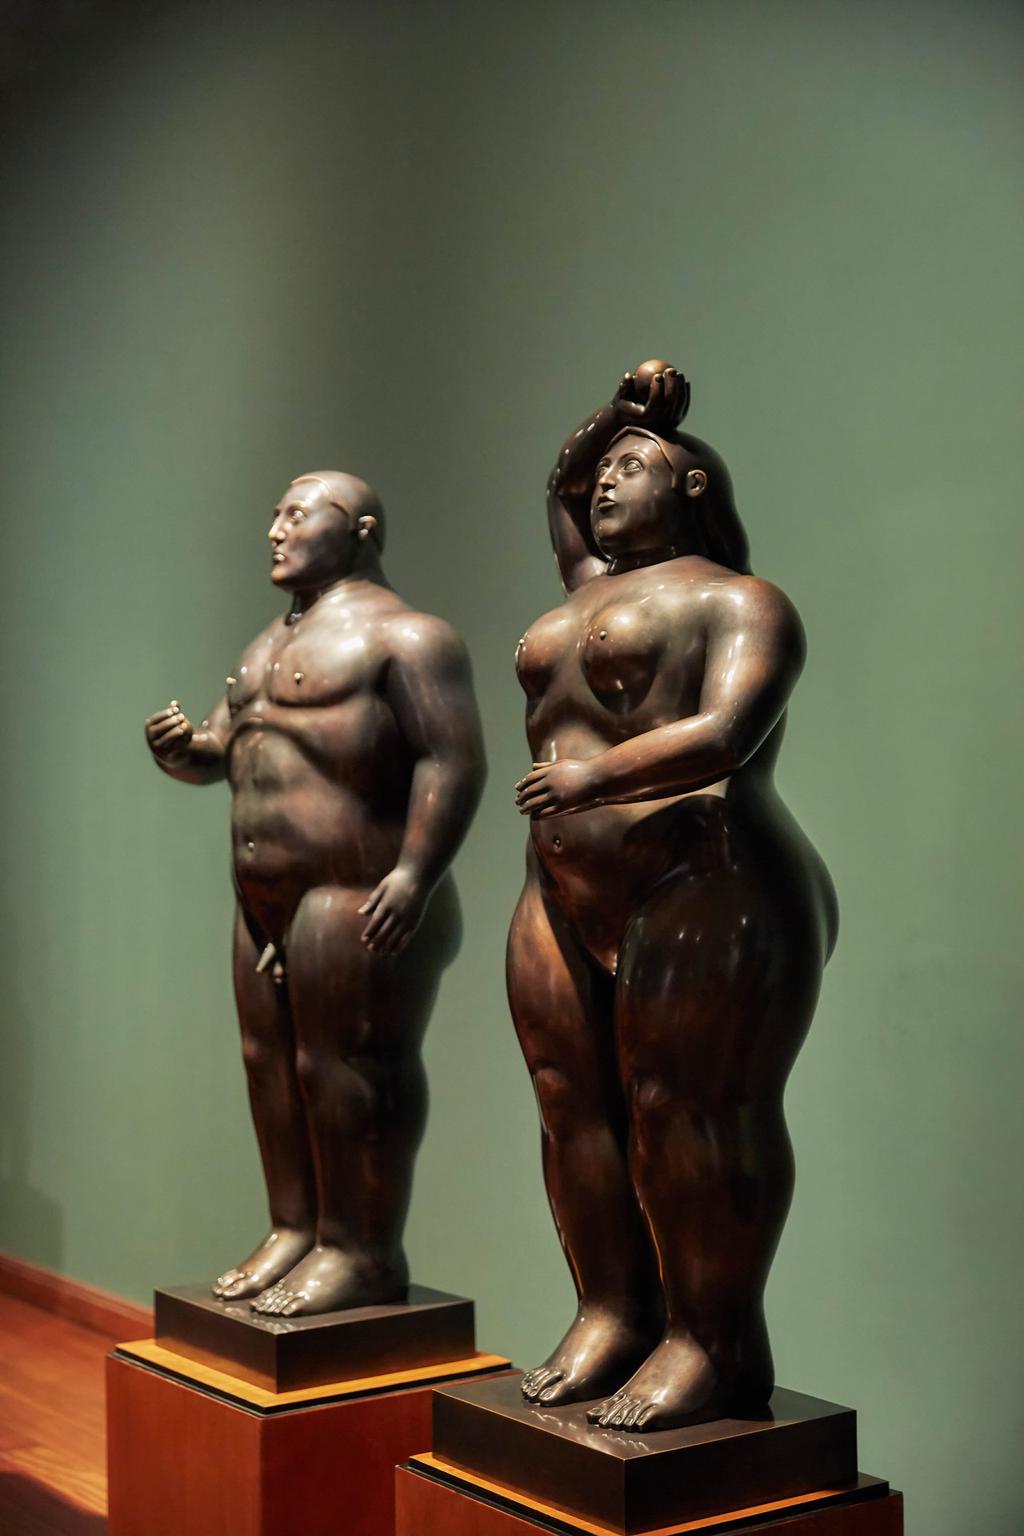 TOURIST ATRACTIONS BOTERO MUSEUM Fernando Botero is the most renowned Colombian artist.